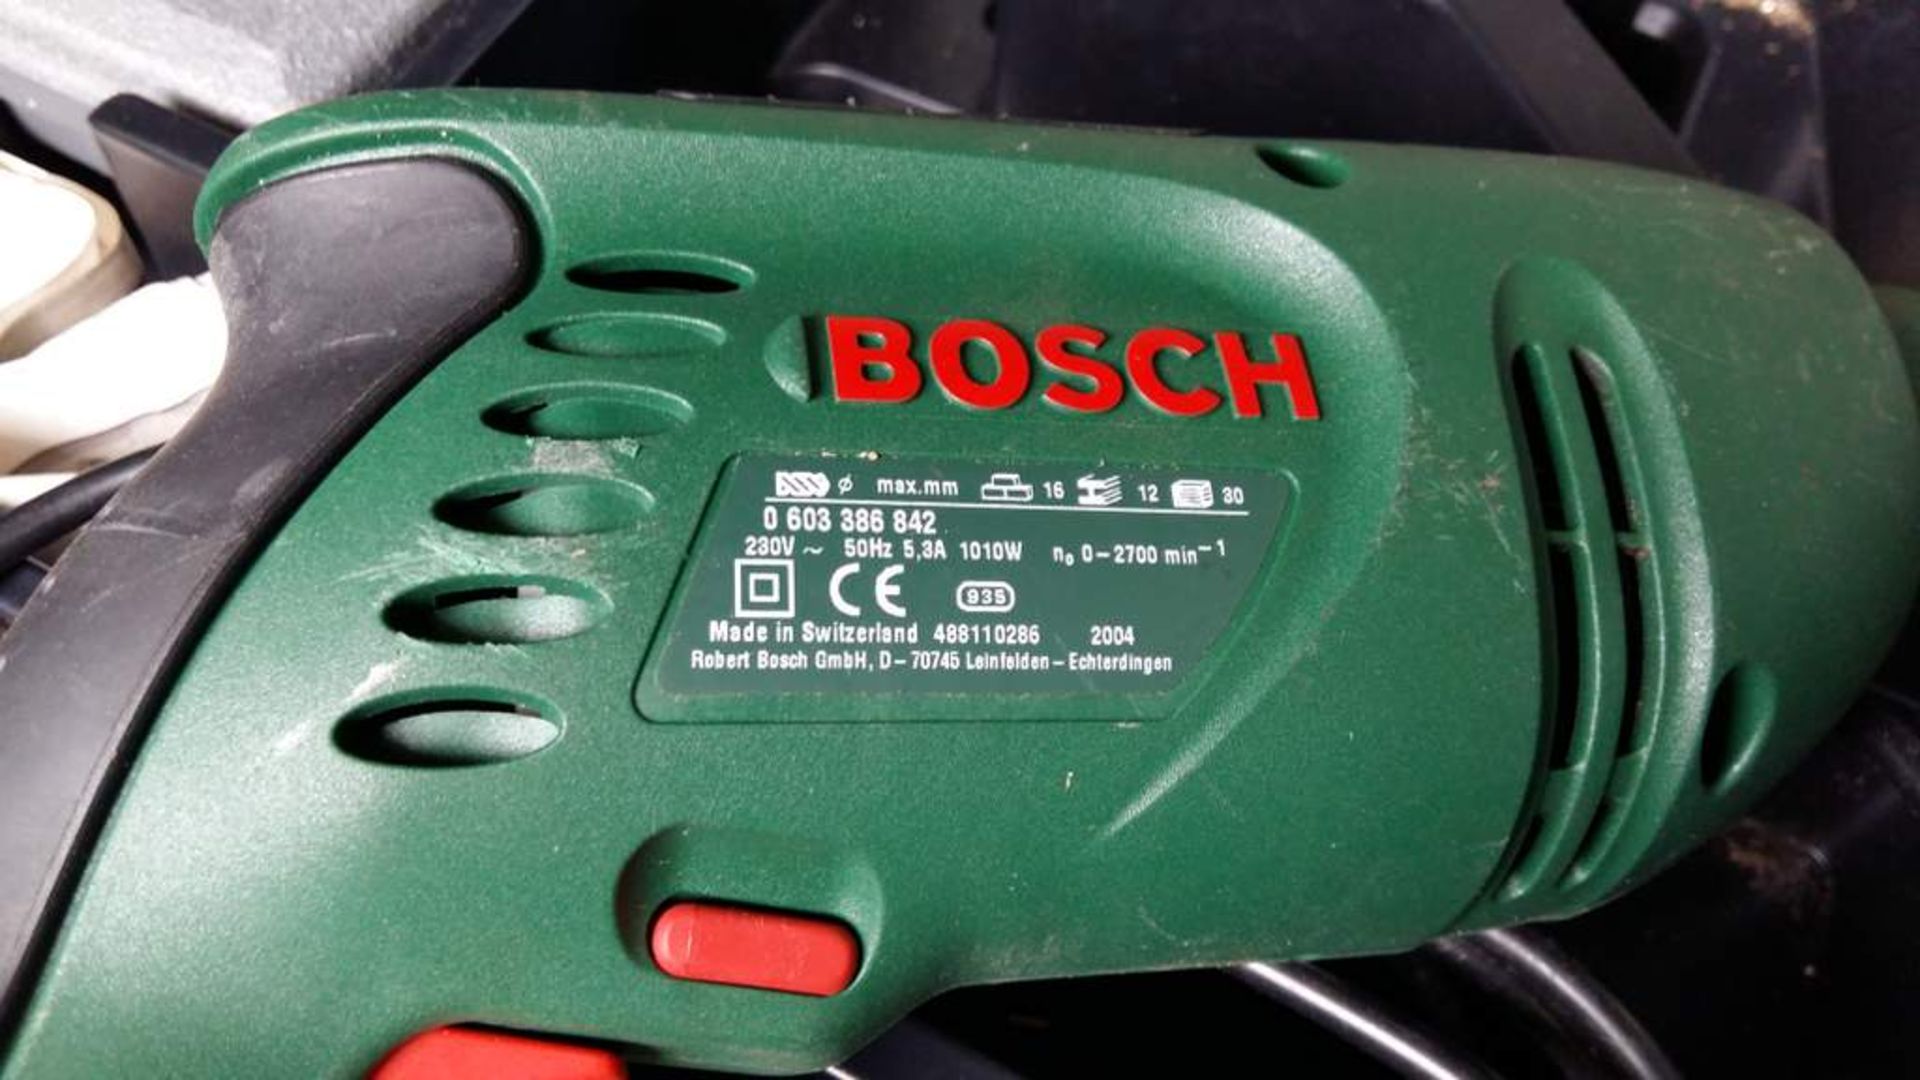 Bosch PSB 1000 RPE electric drill 230v - includes a selection of drill bits - Image 3 of 4